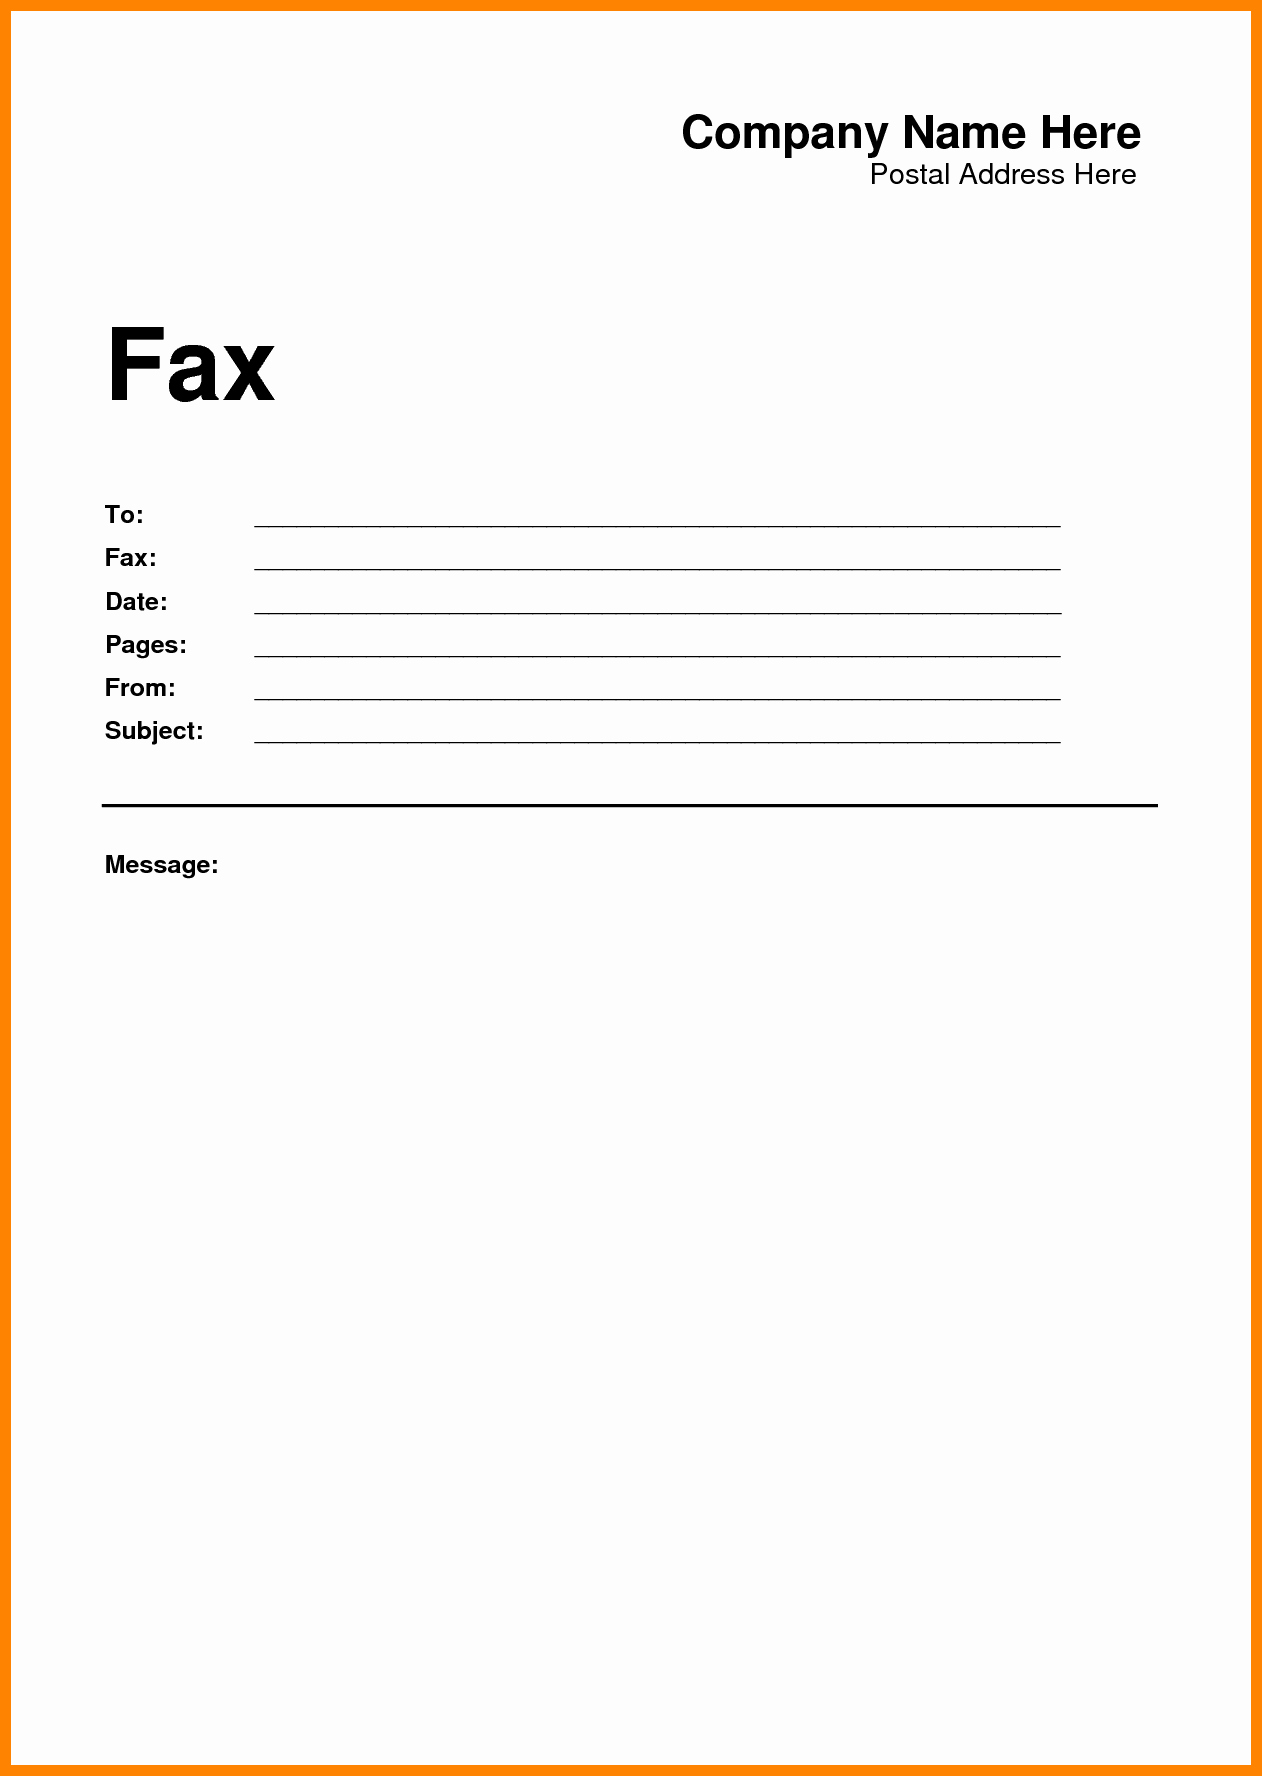 Sample Fax Cover Sheets Template Inspirational 6 Free Fax Cover Sheet